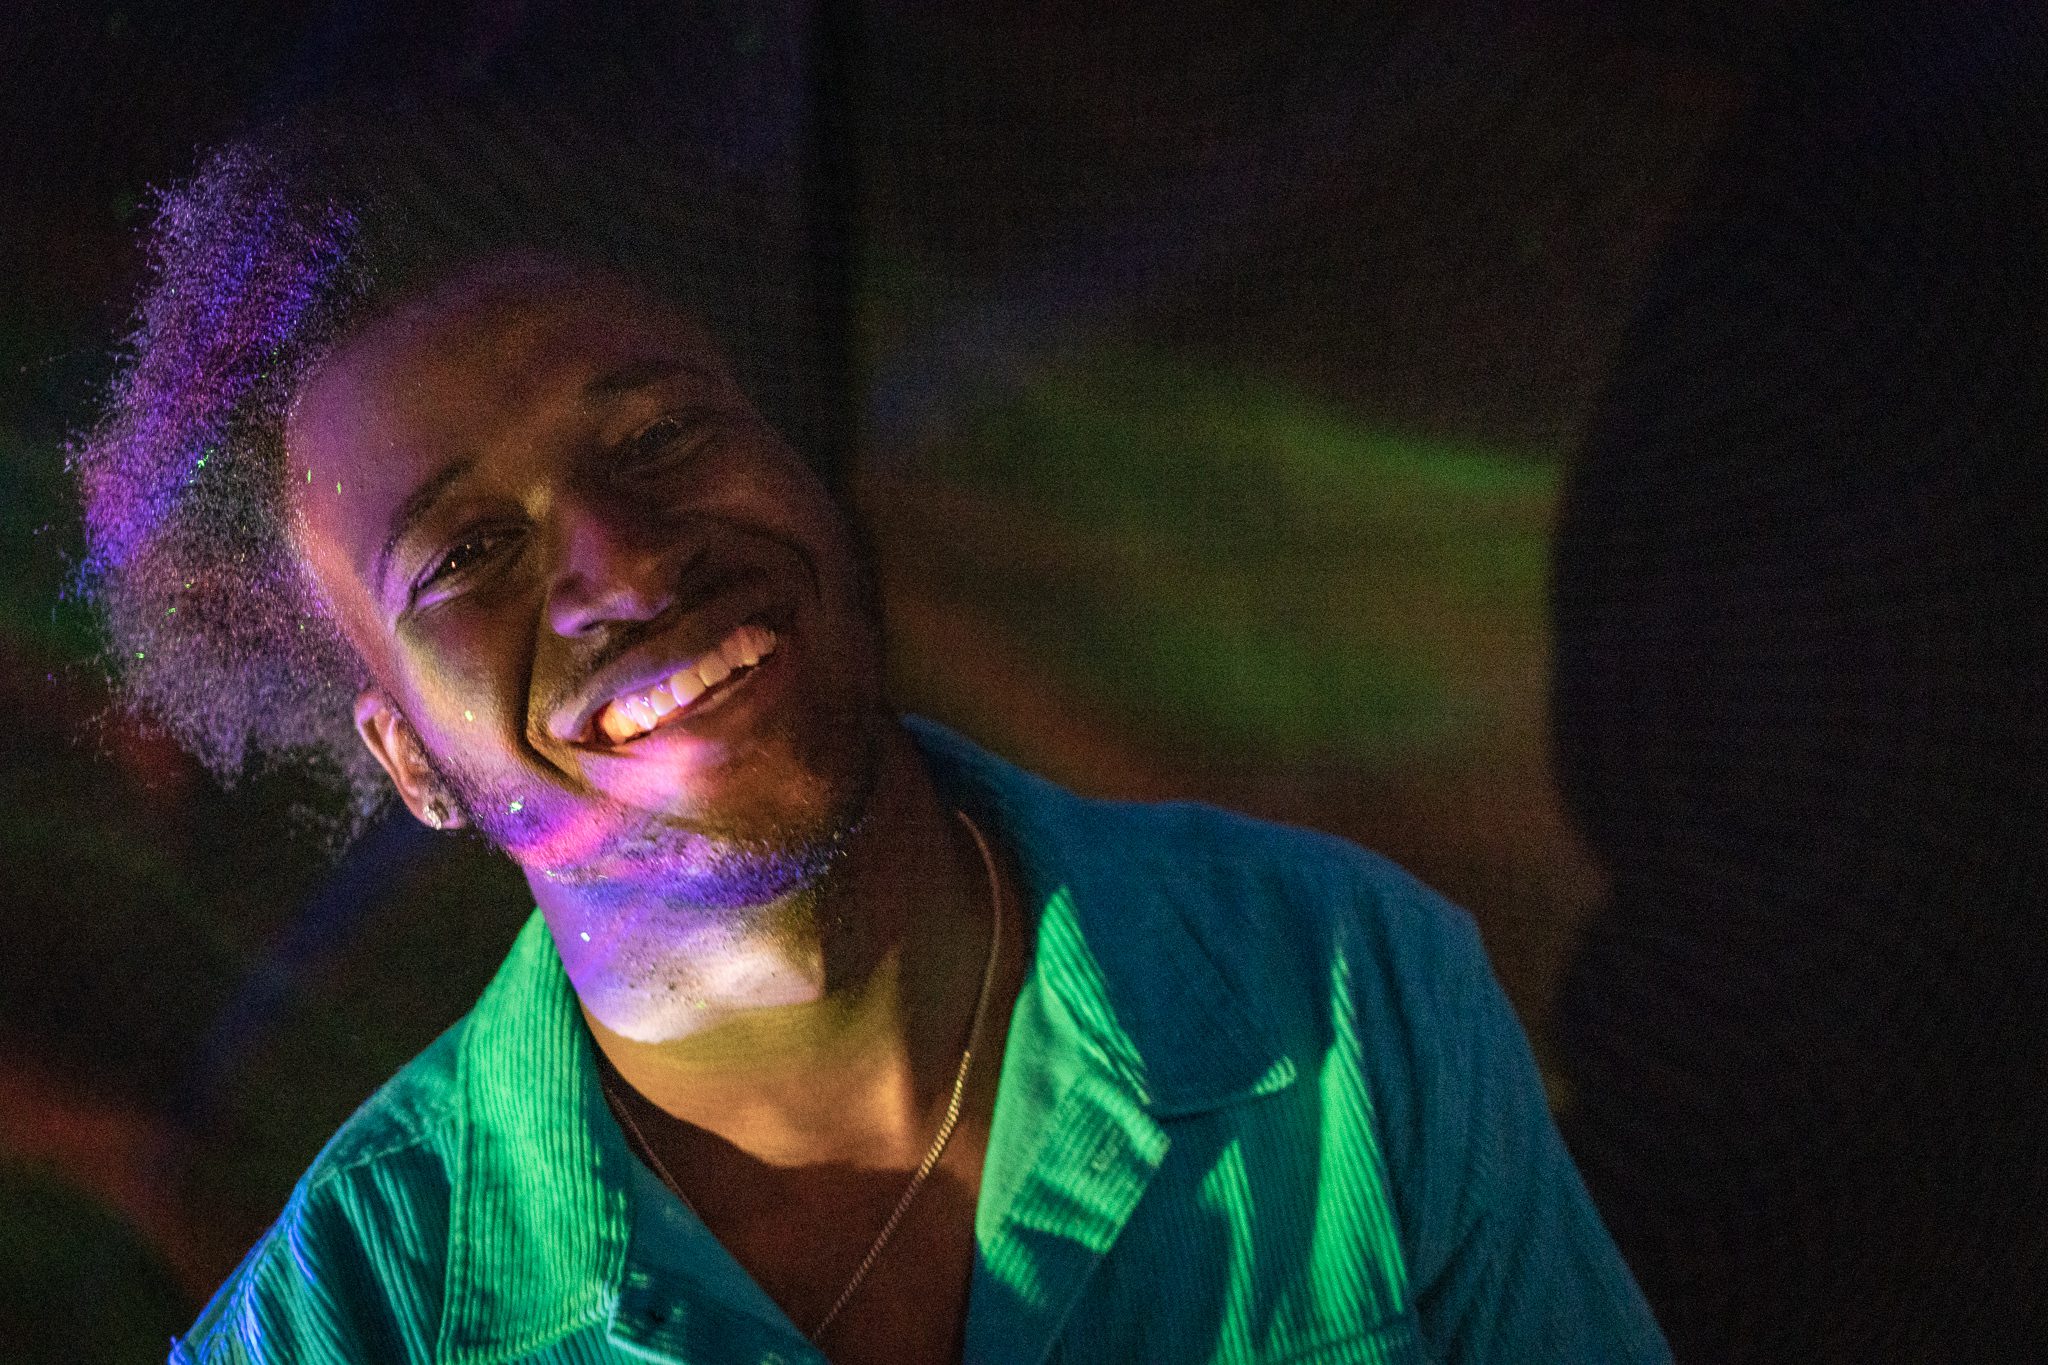 A smiling person leaning to the left, wearing a green button down shirt and gold chain, bathed in rainbow light with and iridescent black background.